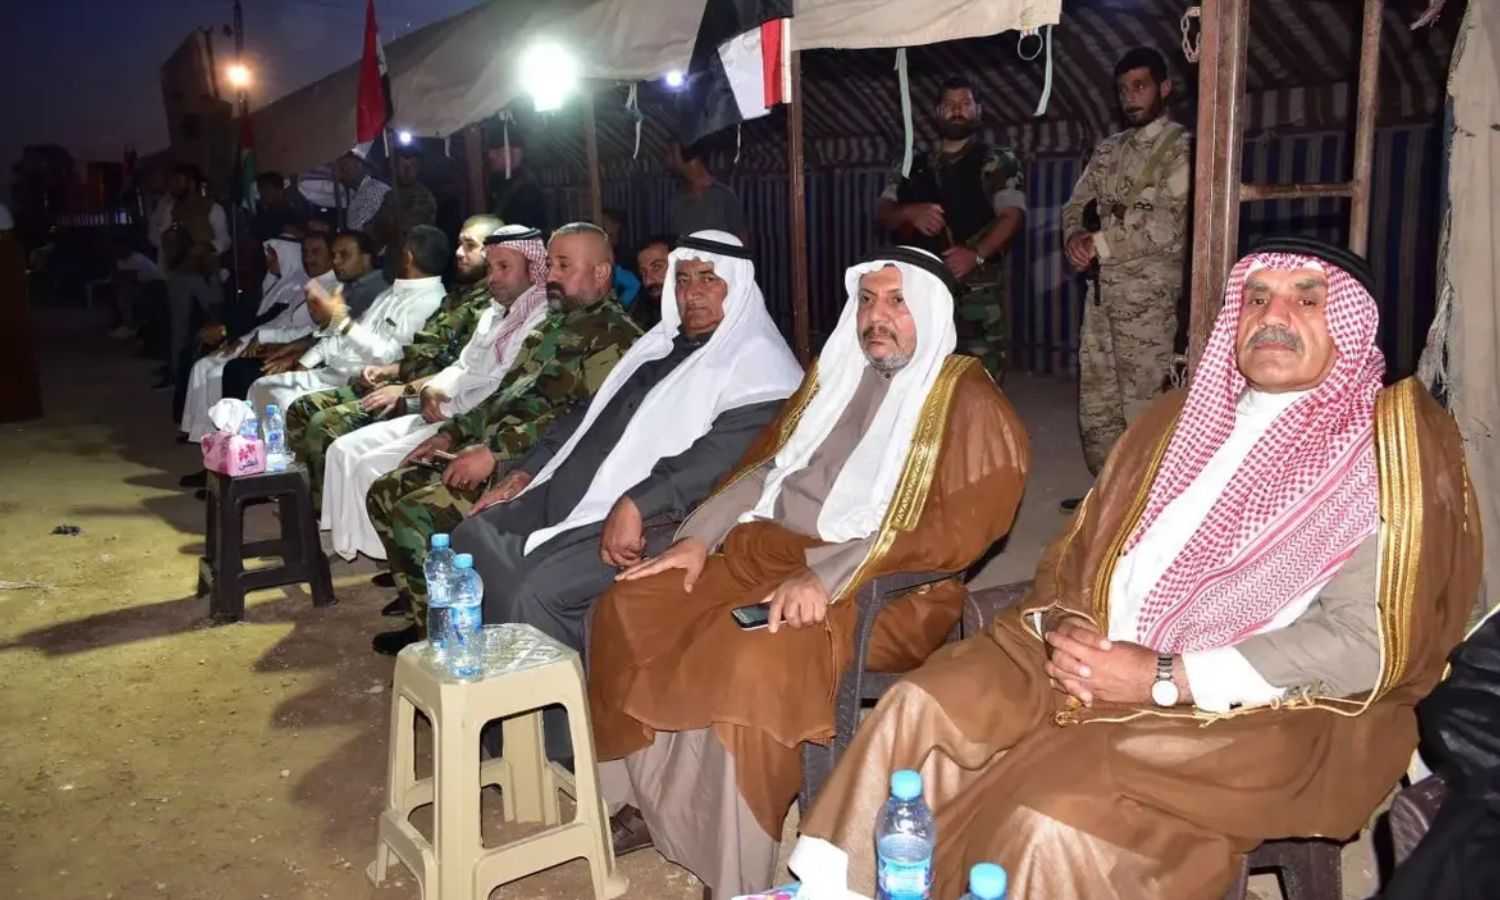 Tribal and clan notables in Deir Ezzor gather in the “Tent of the Homeland” (Khaymat Watan) to support the candidacy of the head of the Syrian regime, Bashar al-Assad, in the elections - 19 May 2021 (Sputnik)